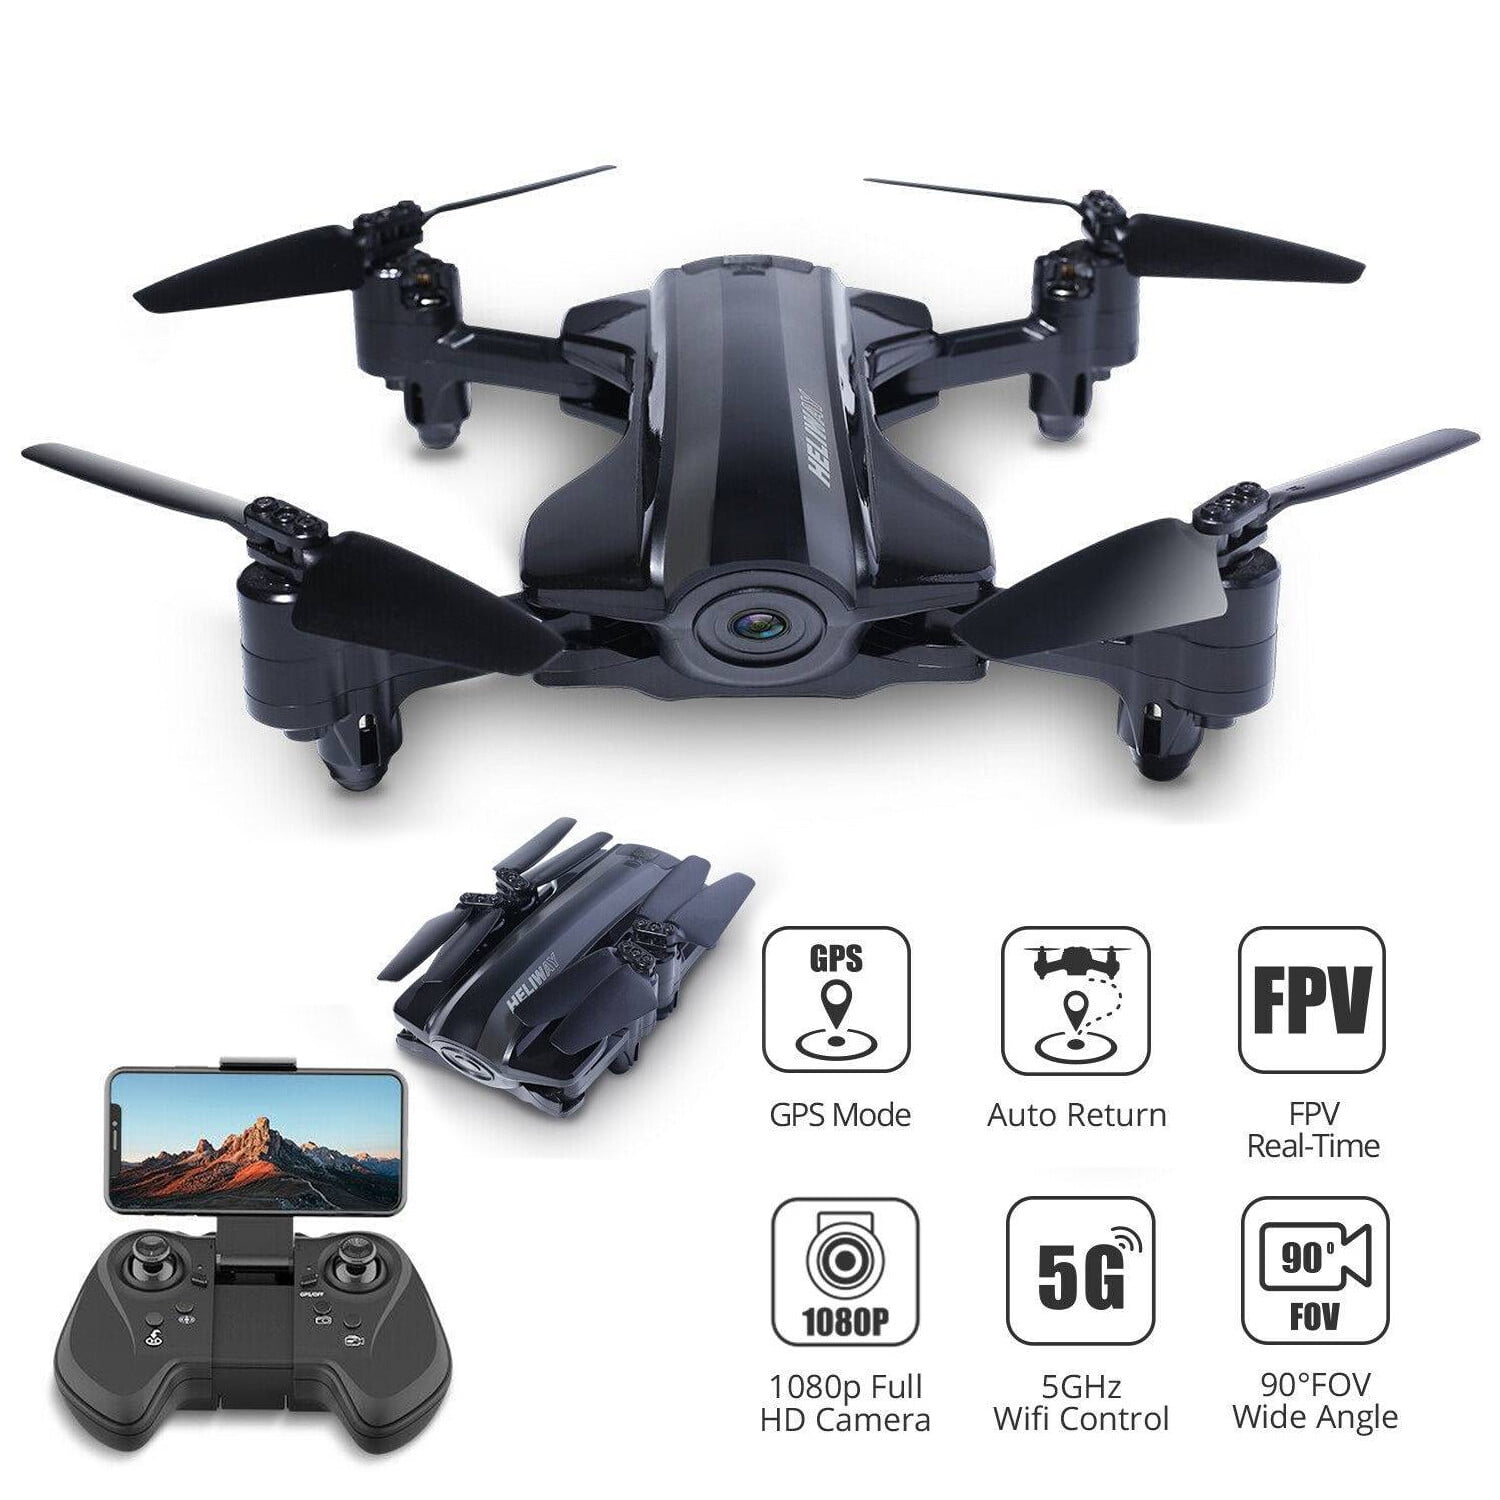 5G FPV GPS Drone Foldable Auto Return Home with 1080P HD Wide Angle Camera Live Video Follow Me Altitude Hold Headless Mode RC Quadcopter for Kids and Adults 